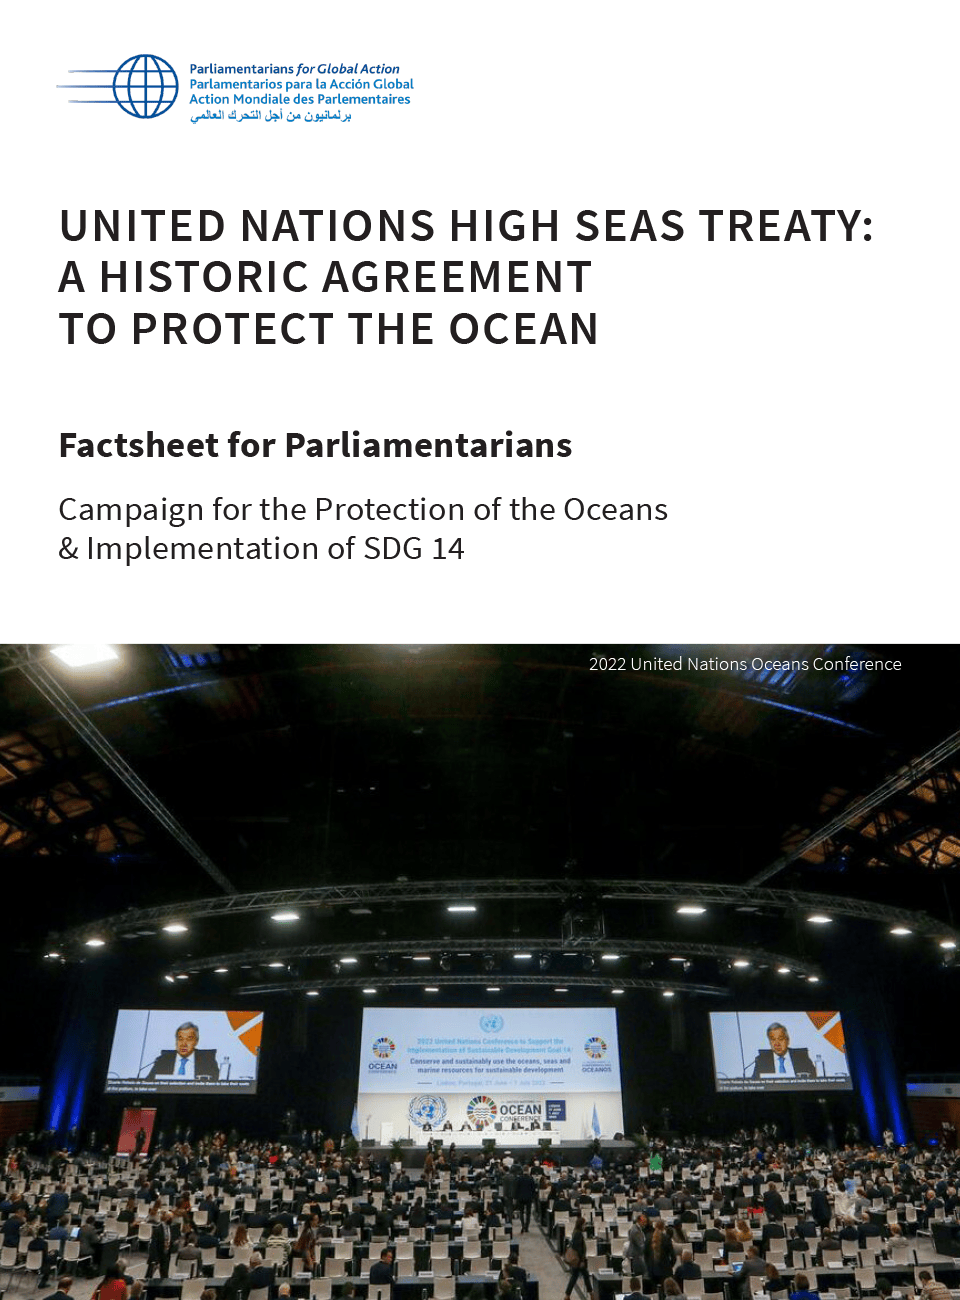 Factsheet for Parliamentarians: United Nations High Seas Treaty: An Historic Agreement to Protect the Ocean